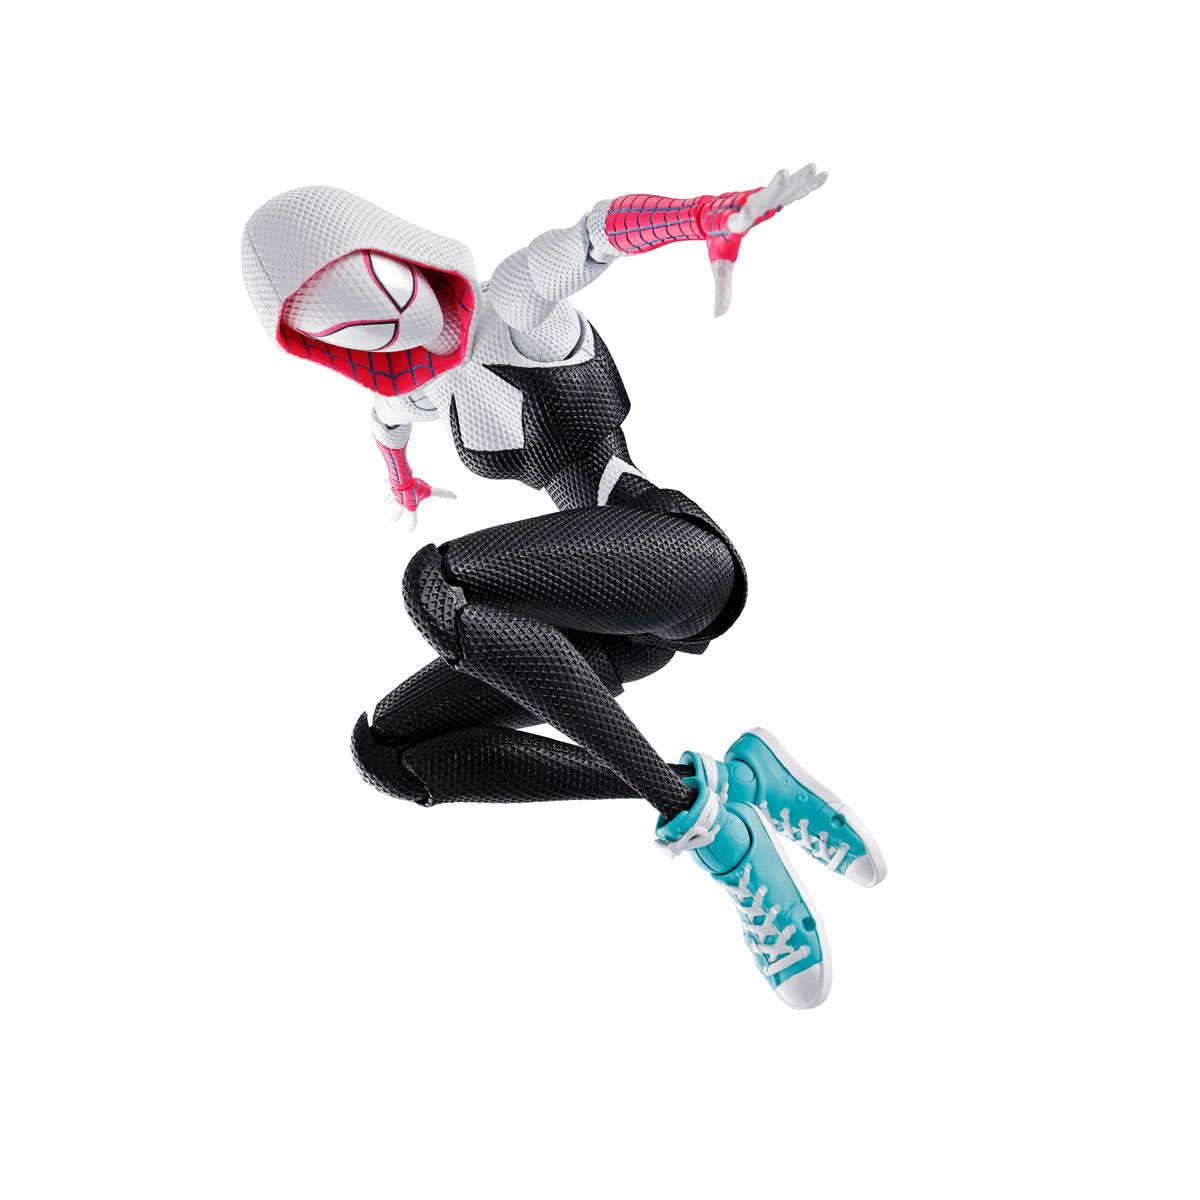 Spider-Man Across the Spiderverse Spider-Gwen Action Figure by S.H.Figuarts -SH Figuarts - India - www.superherotoystore.com